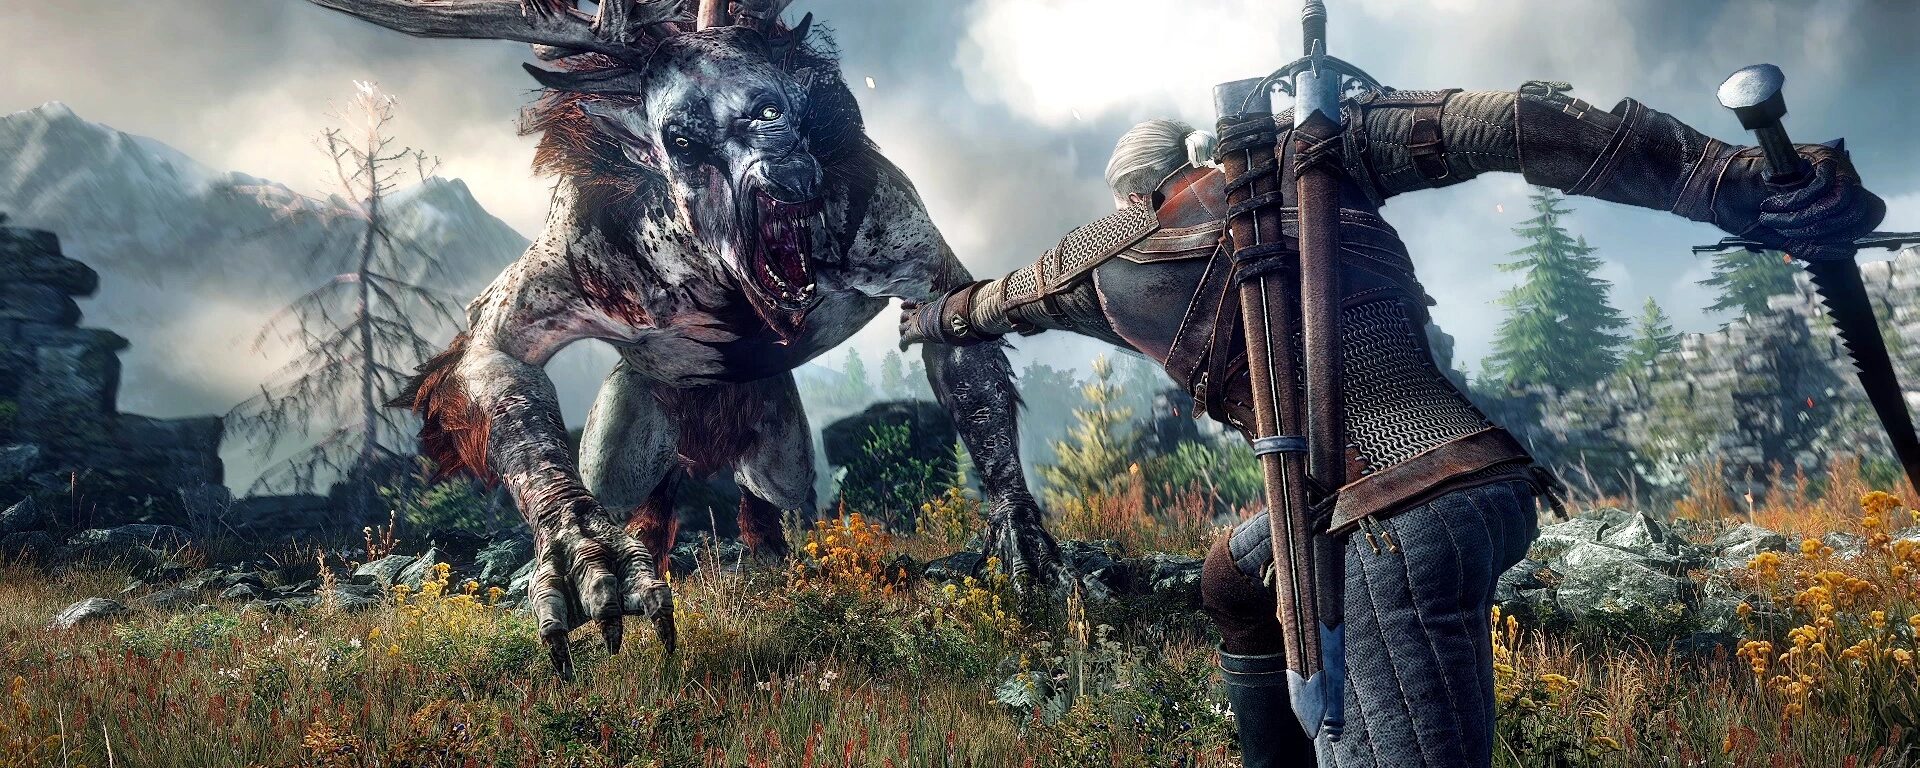 7 adventure games: The Witcher 3